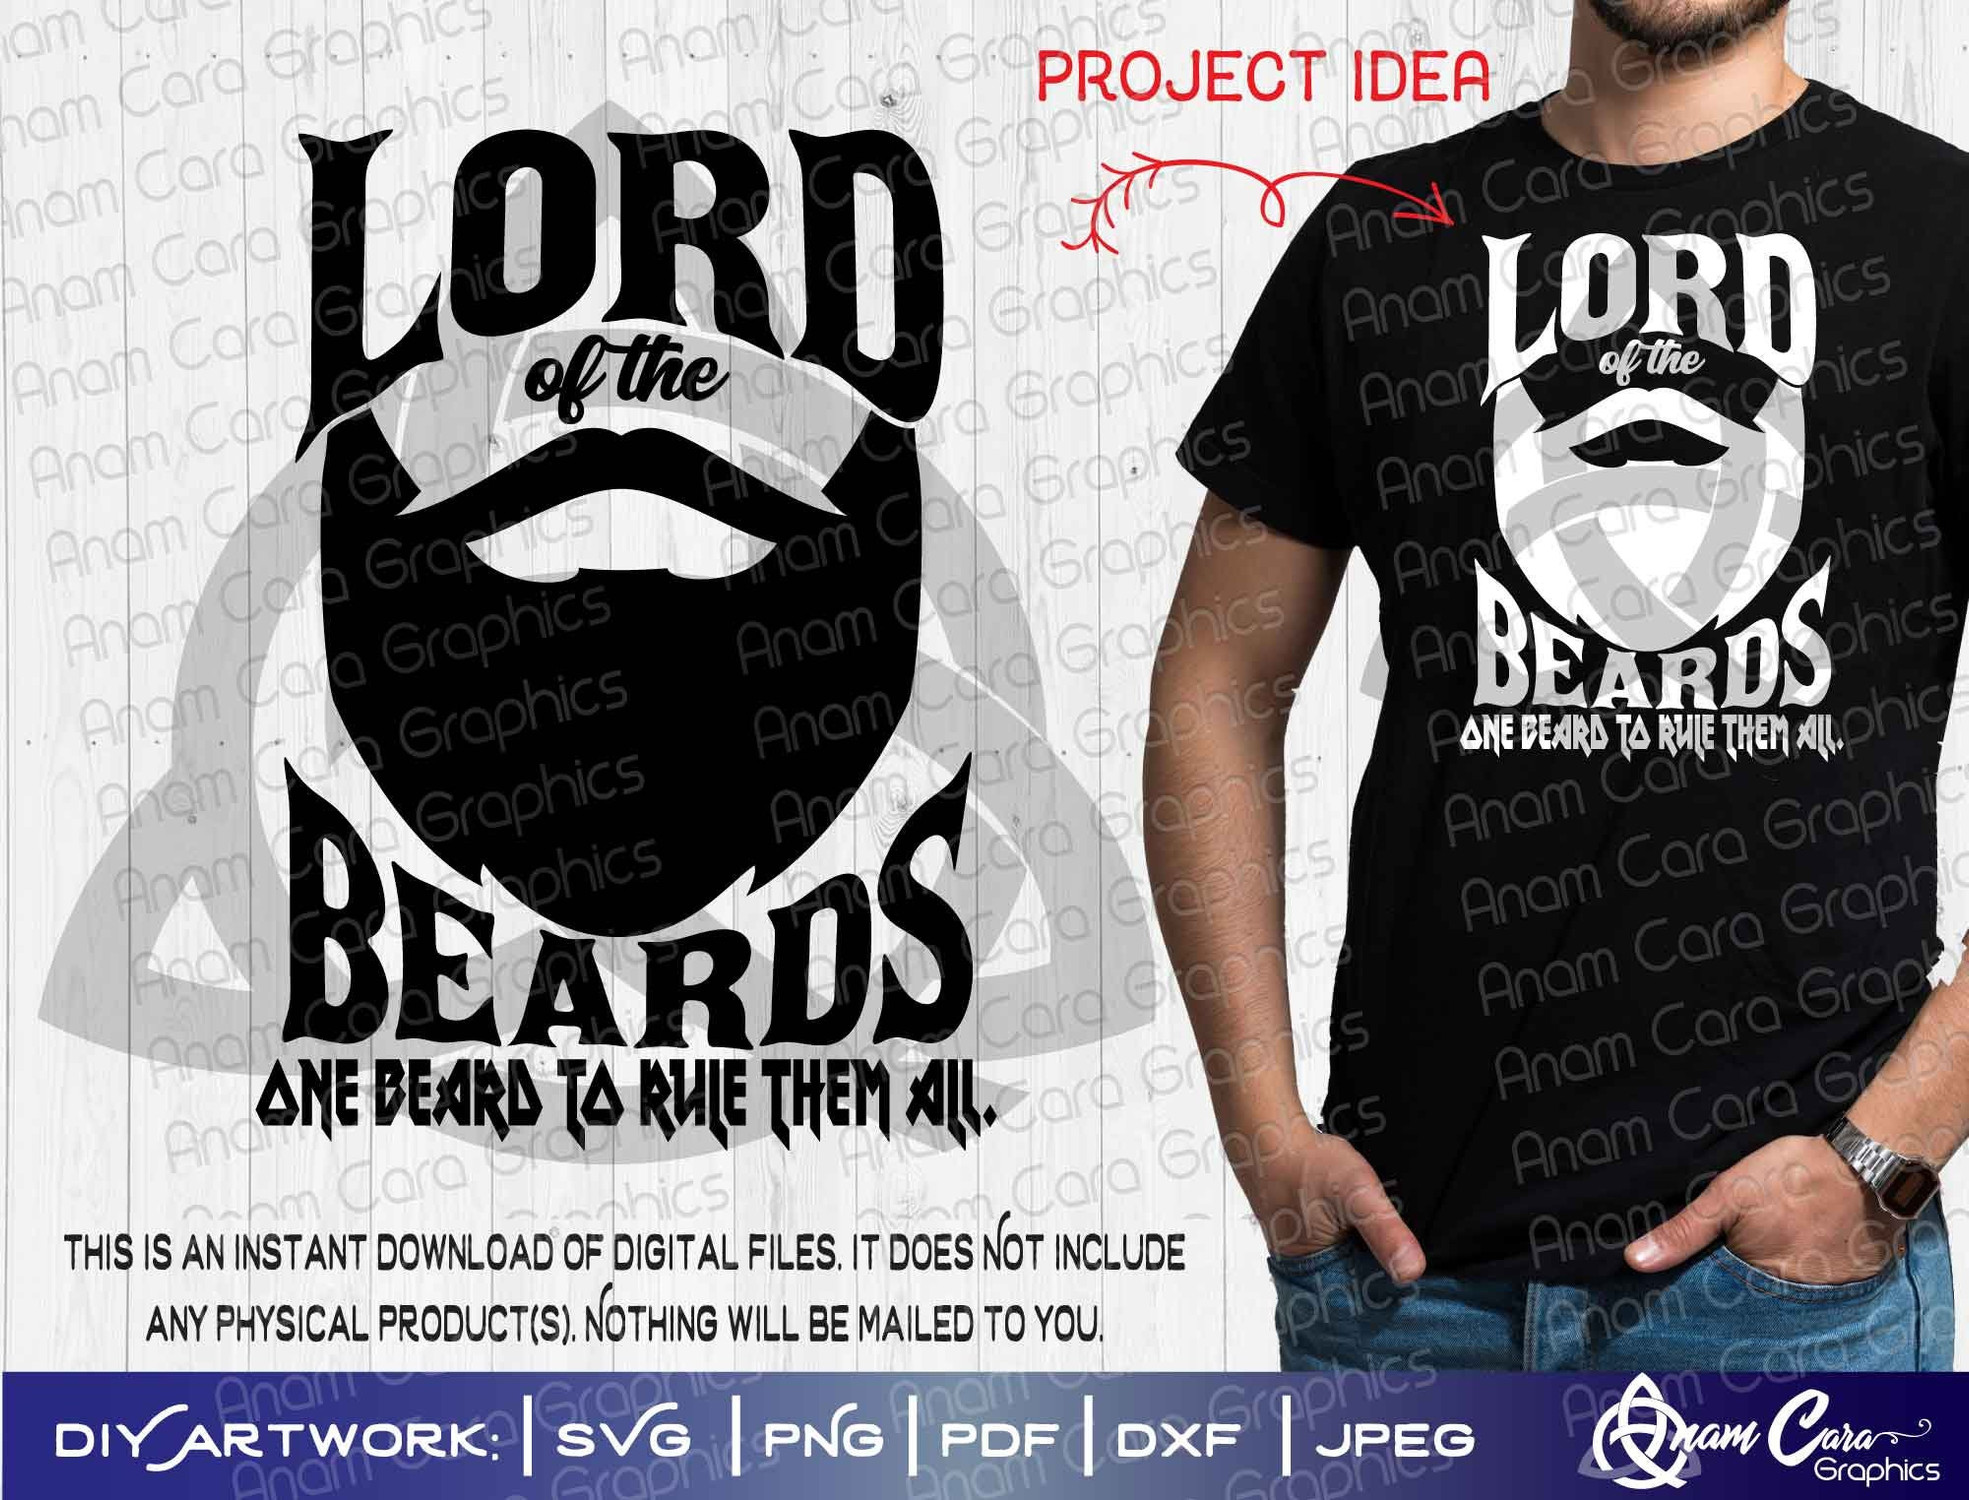 Lord of the Beards.One Beard to Rule them All